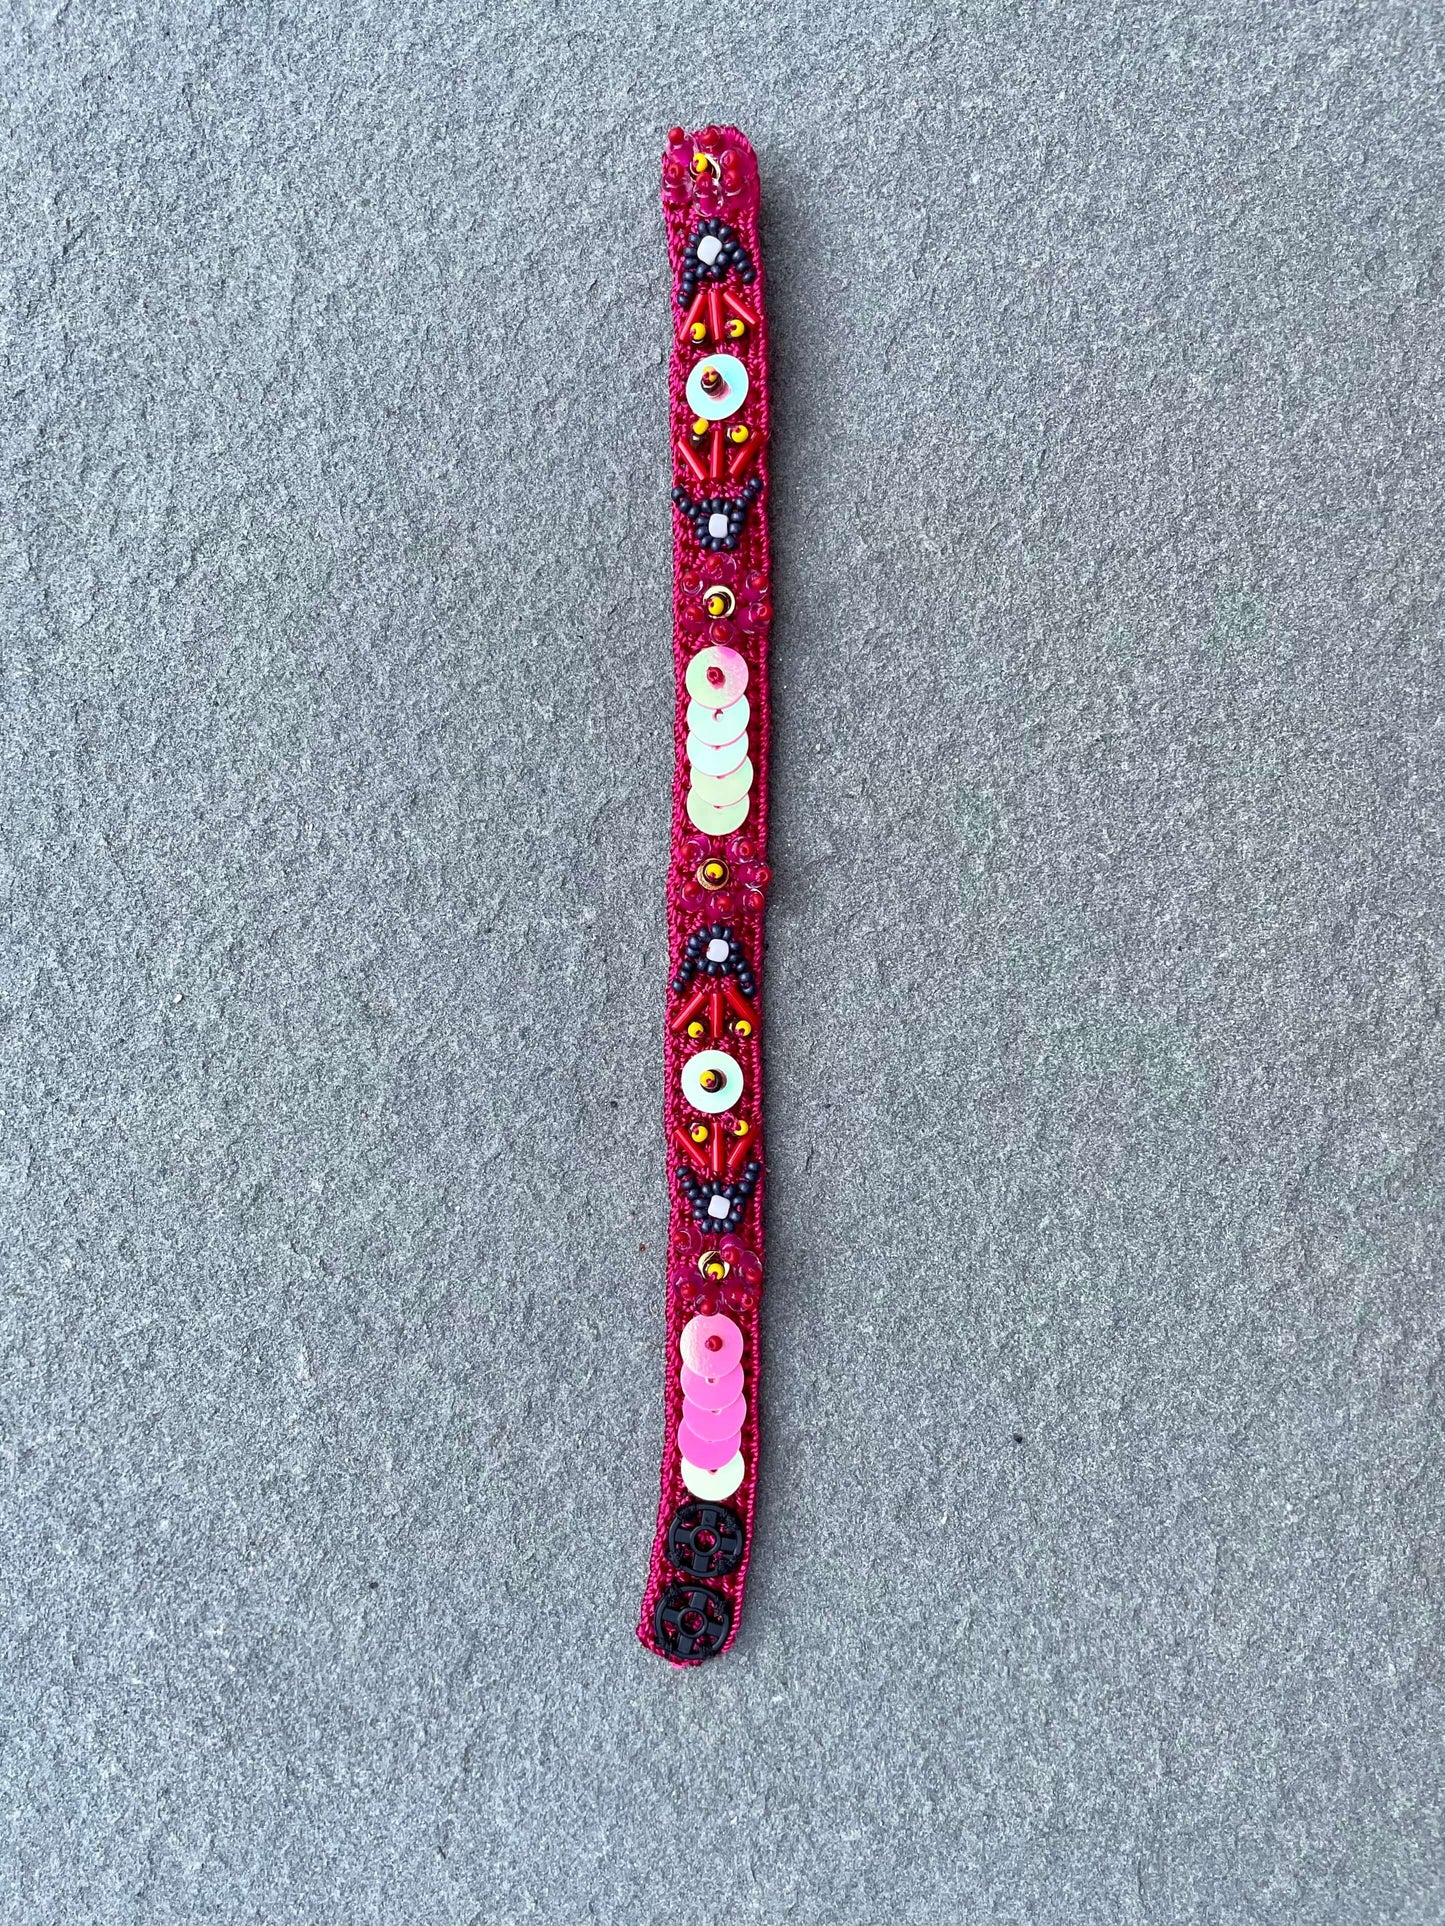 Floral Handmade Bead and Sequins Embroidery Bracelet by Seyyah in Fuchsia